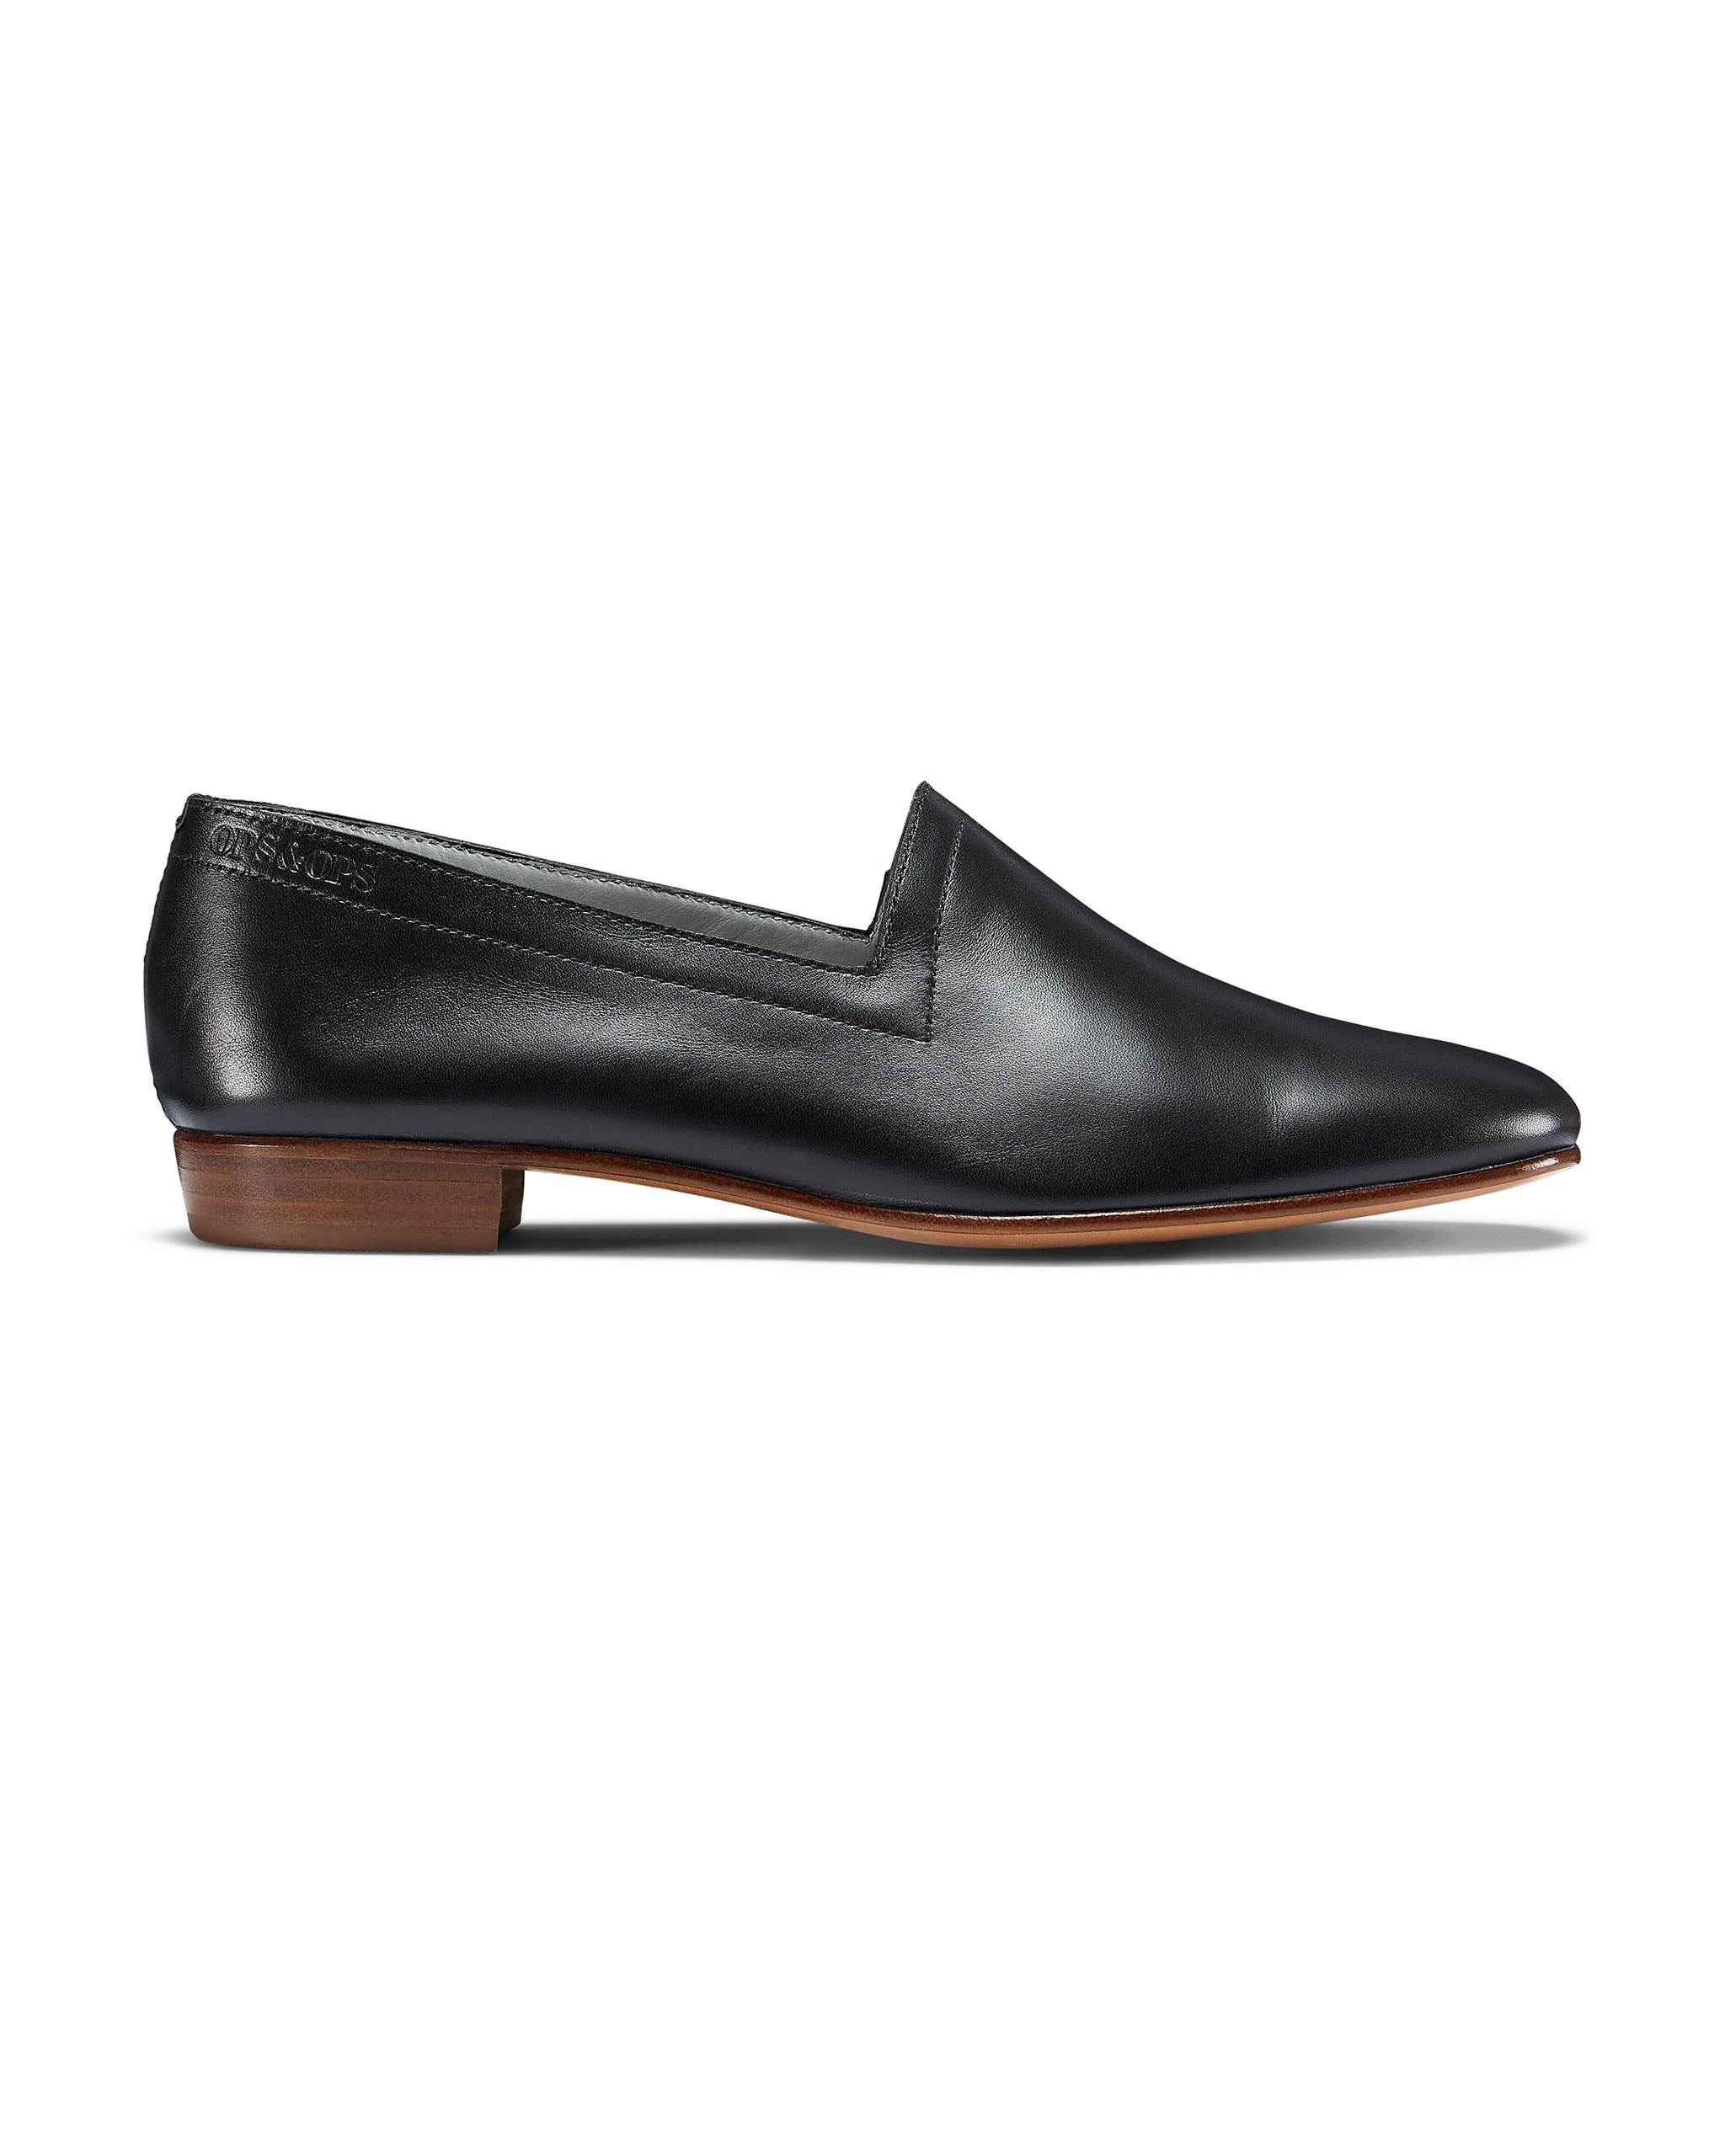 Ops&Ops No17 Classic black leather loafers, side view